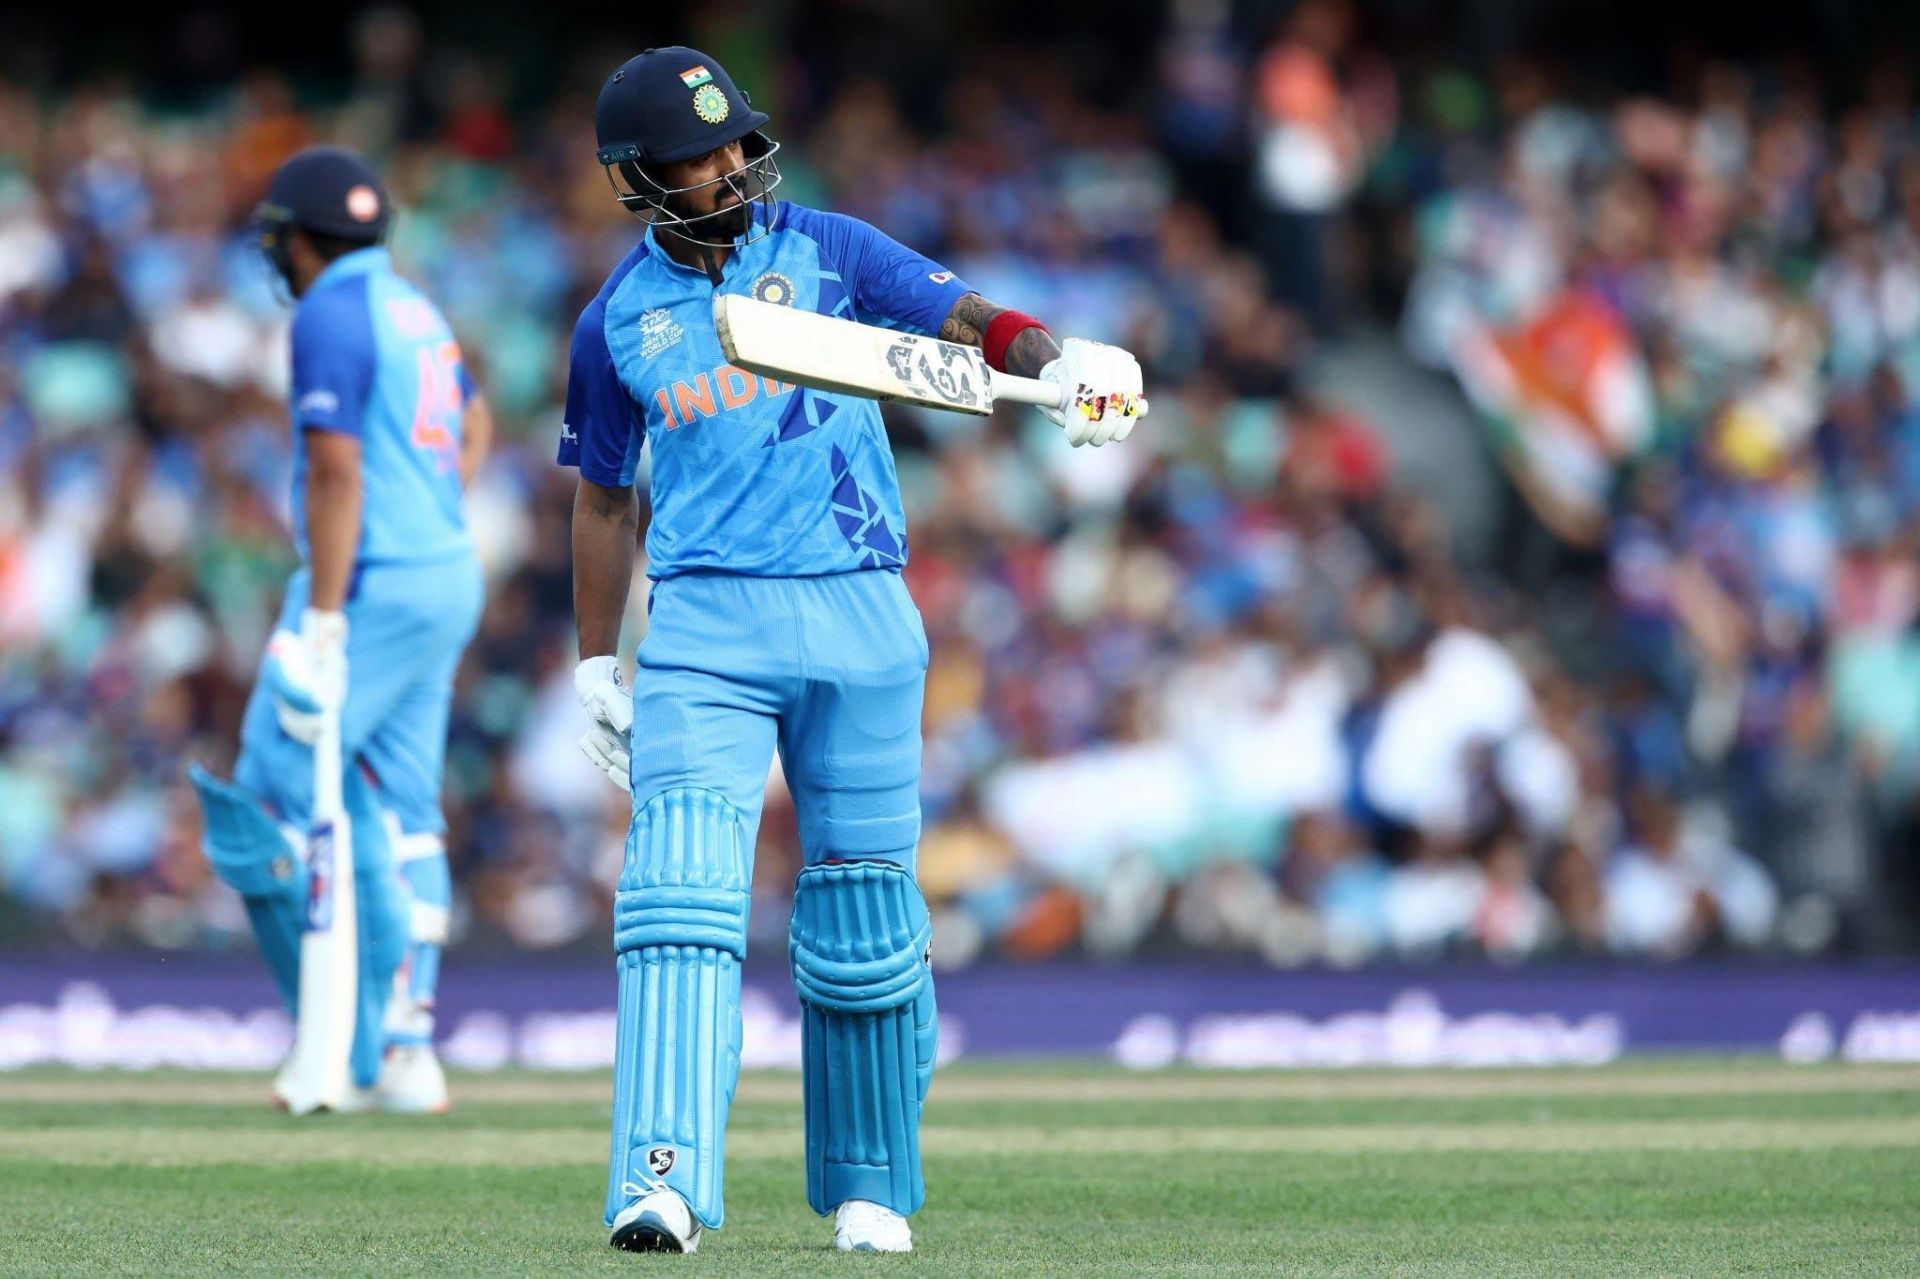 KL Rahul failed for the third T20 World Cup game in a row